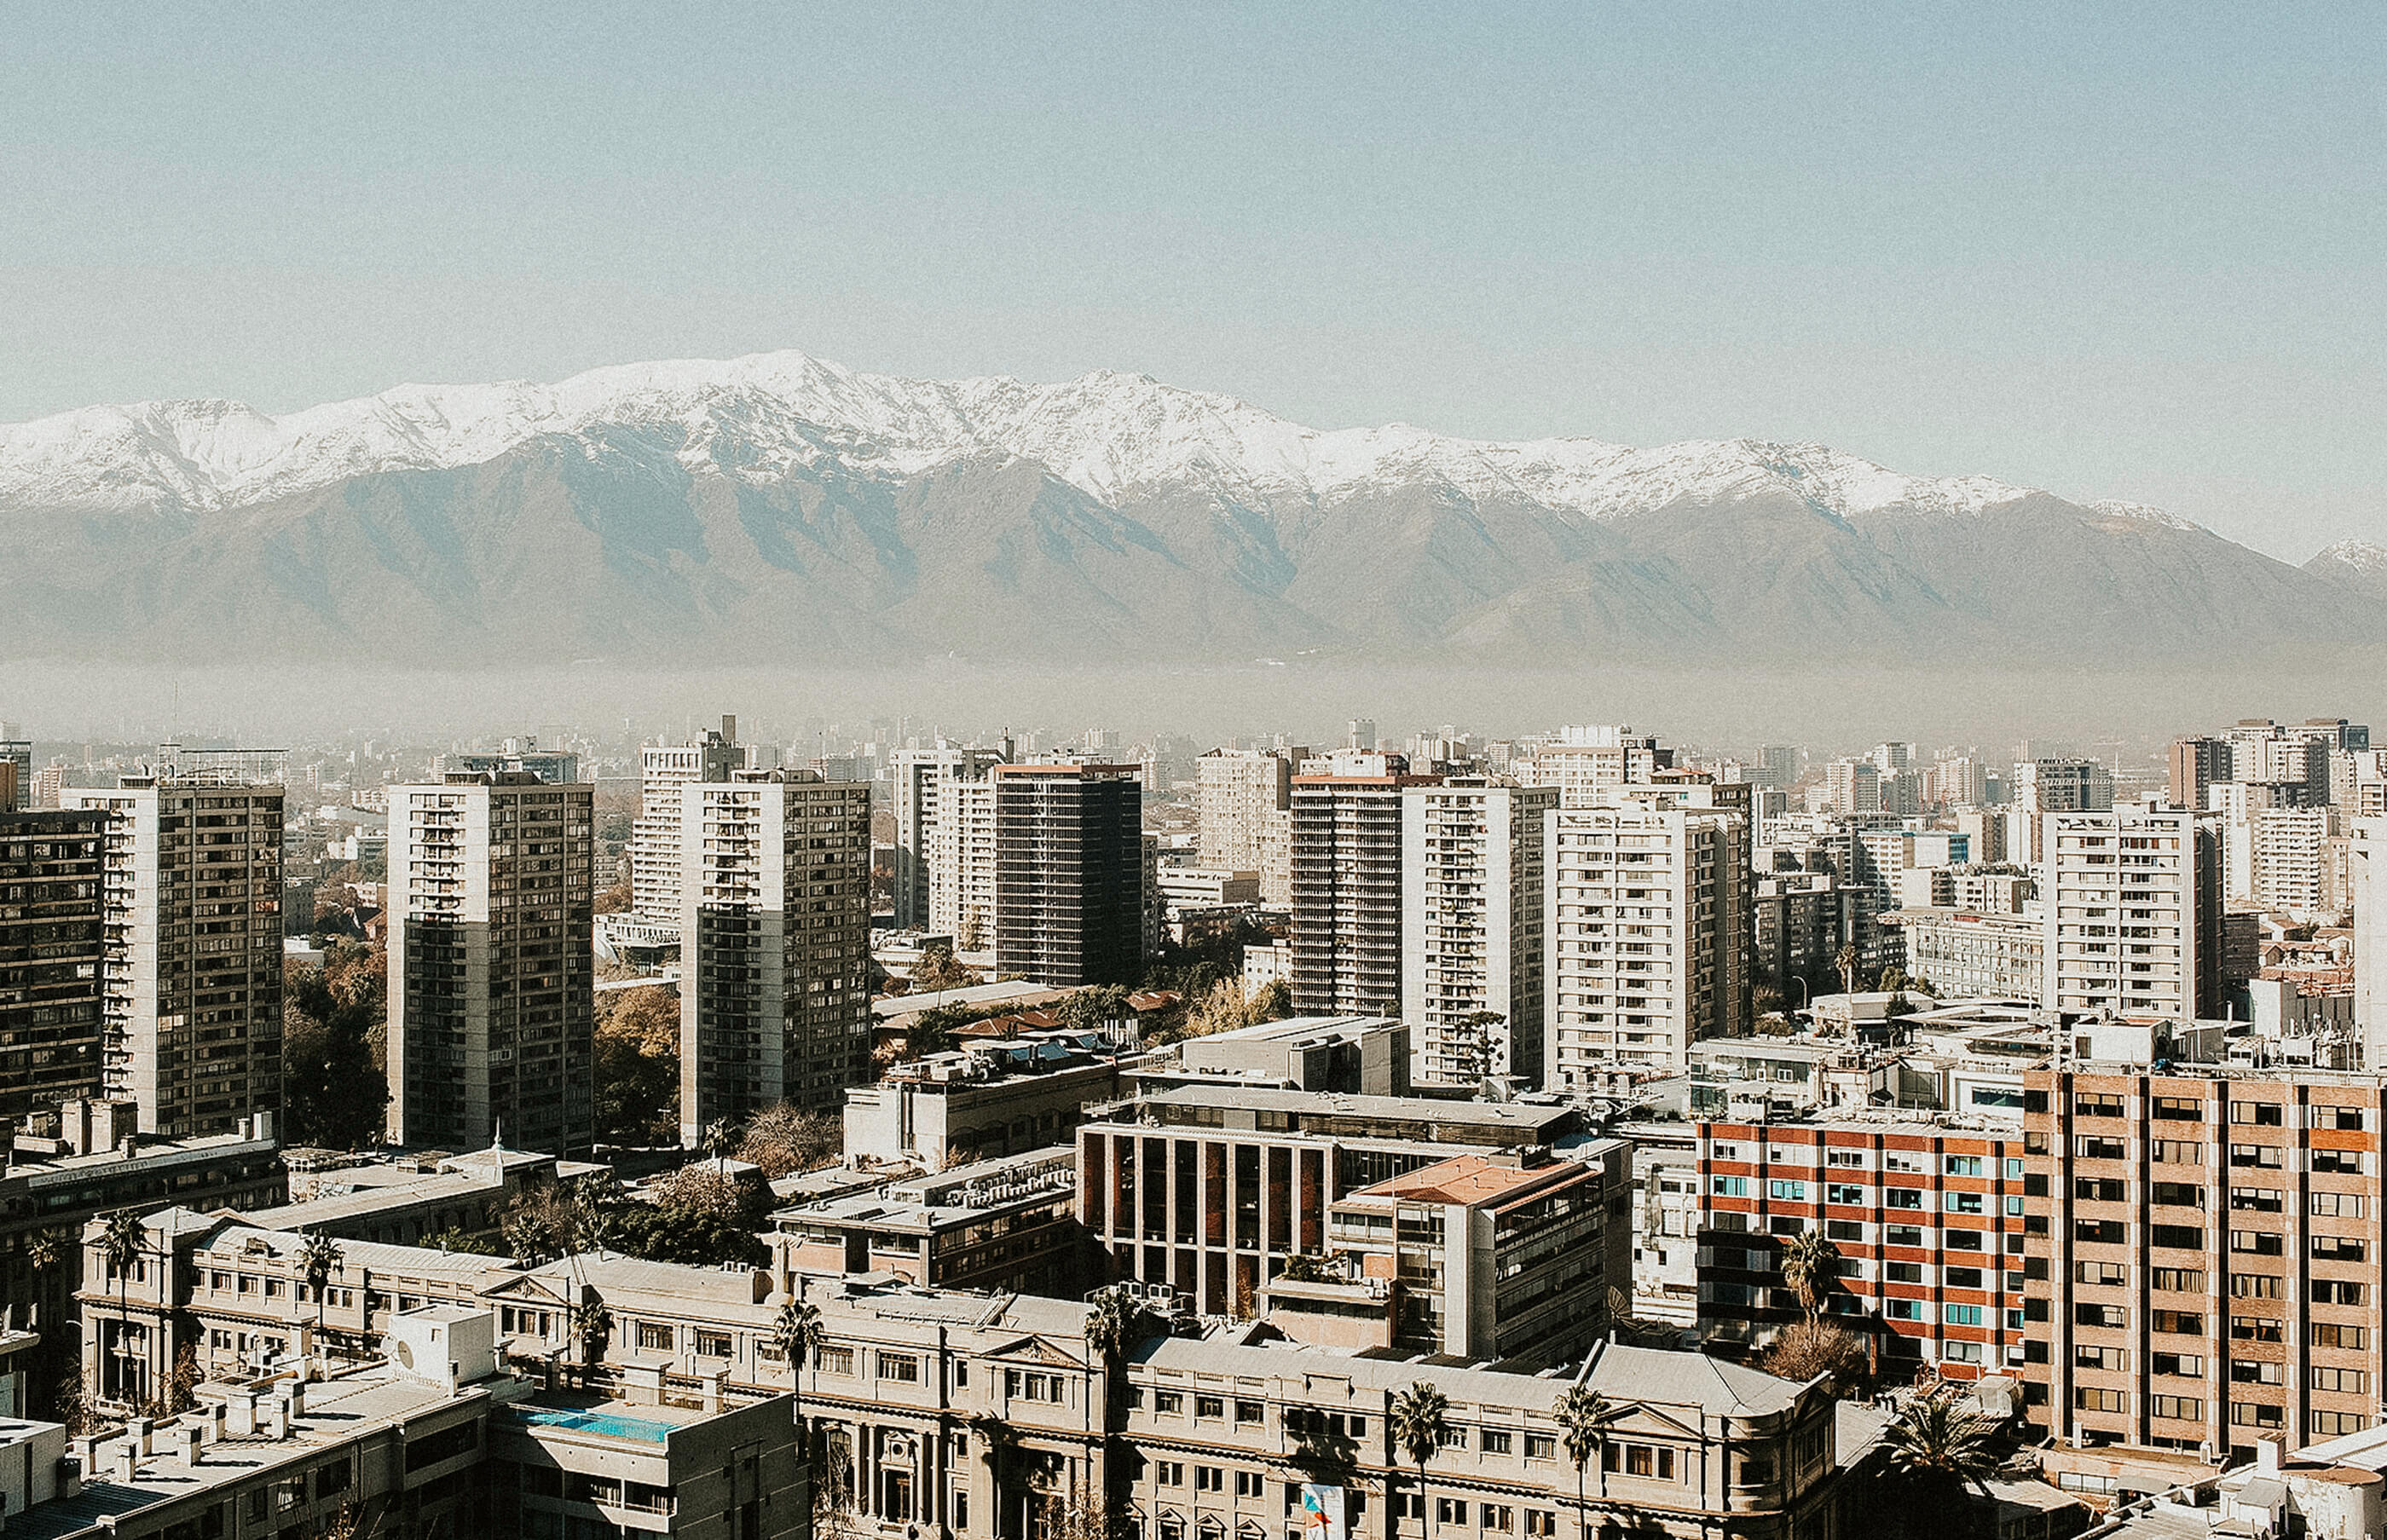 How To See Santiago With Our Awesome Free Walking Tour!